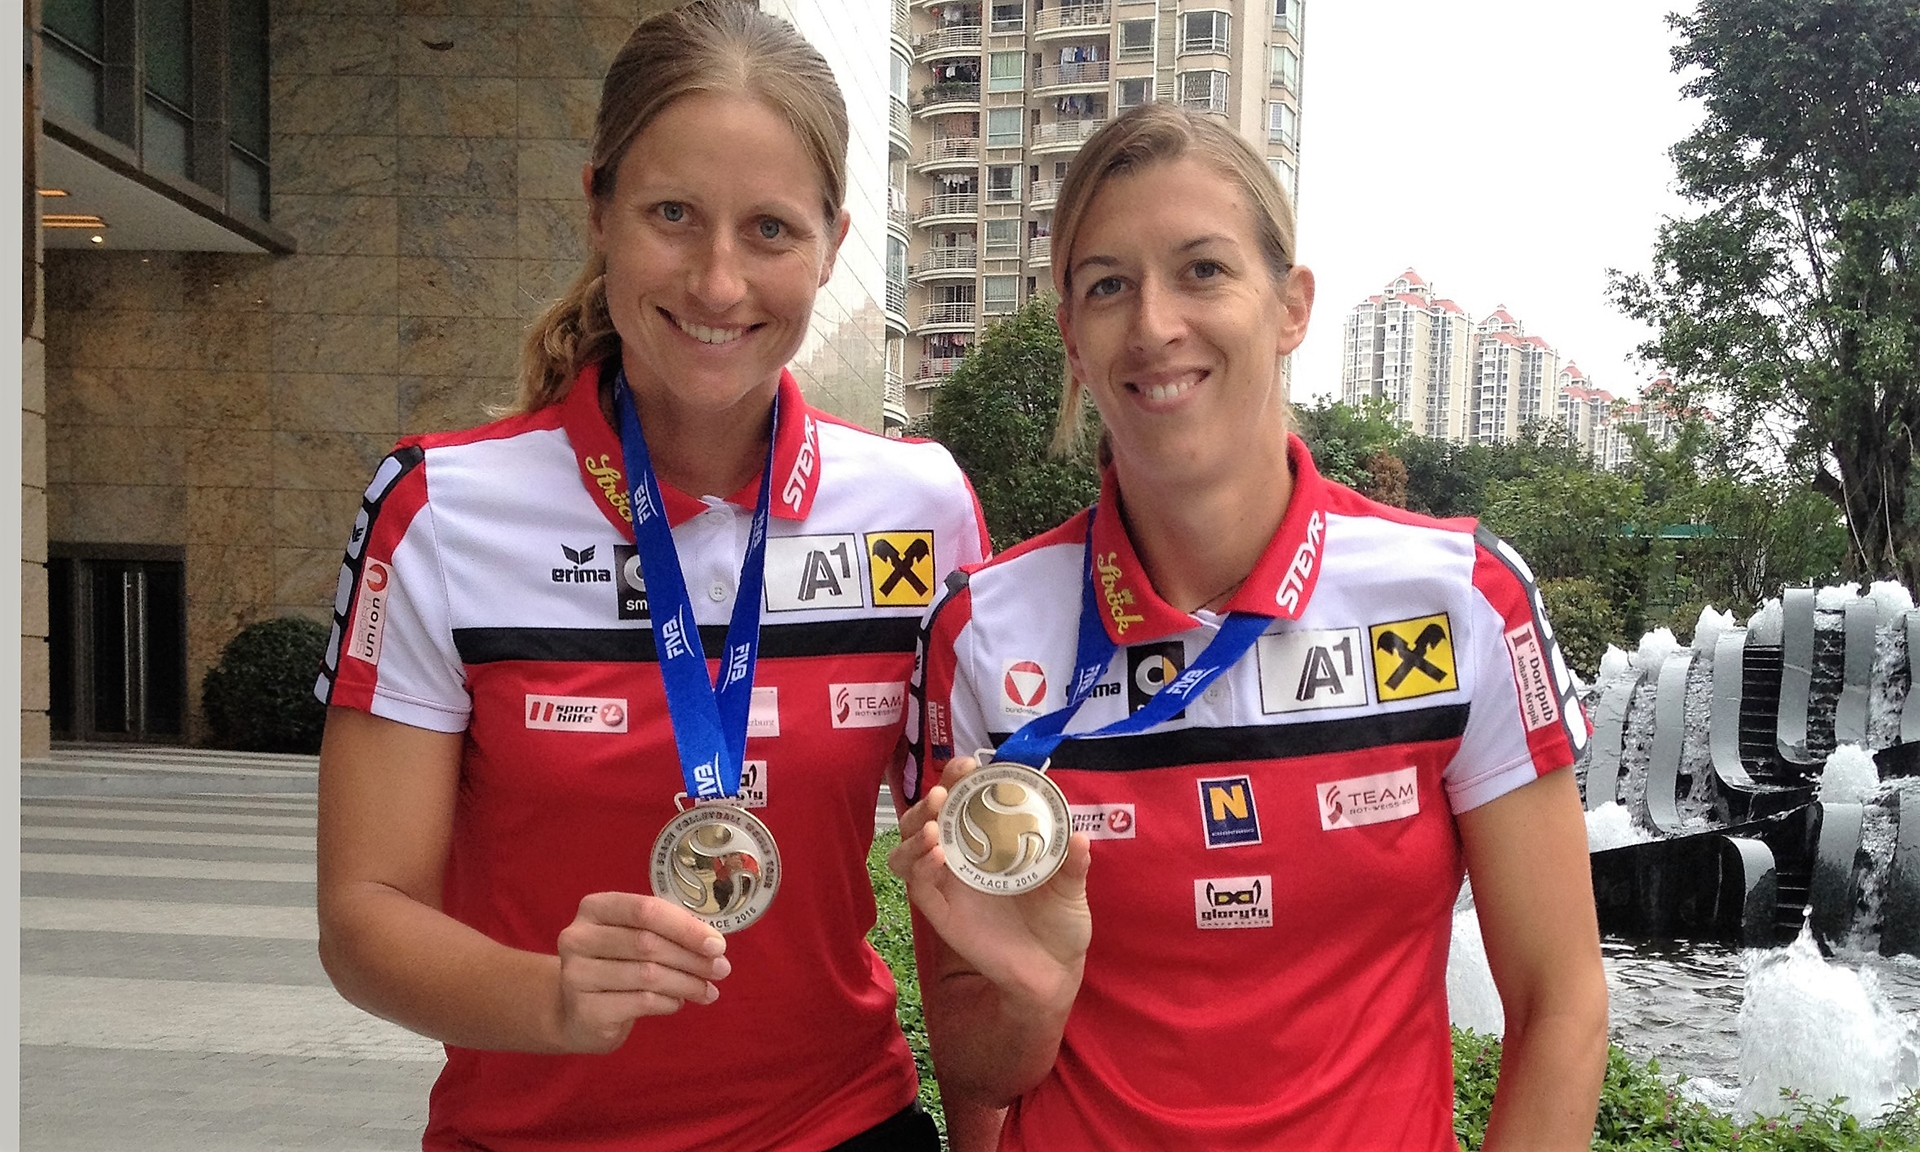 The lucky silver medalists of the Xianmen Open, Barbara Hansel and Stefanie Schwaiger credit: Schwaiger/Hansel (private)